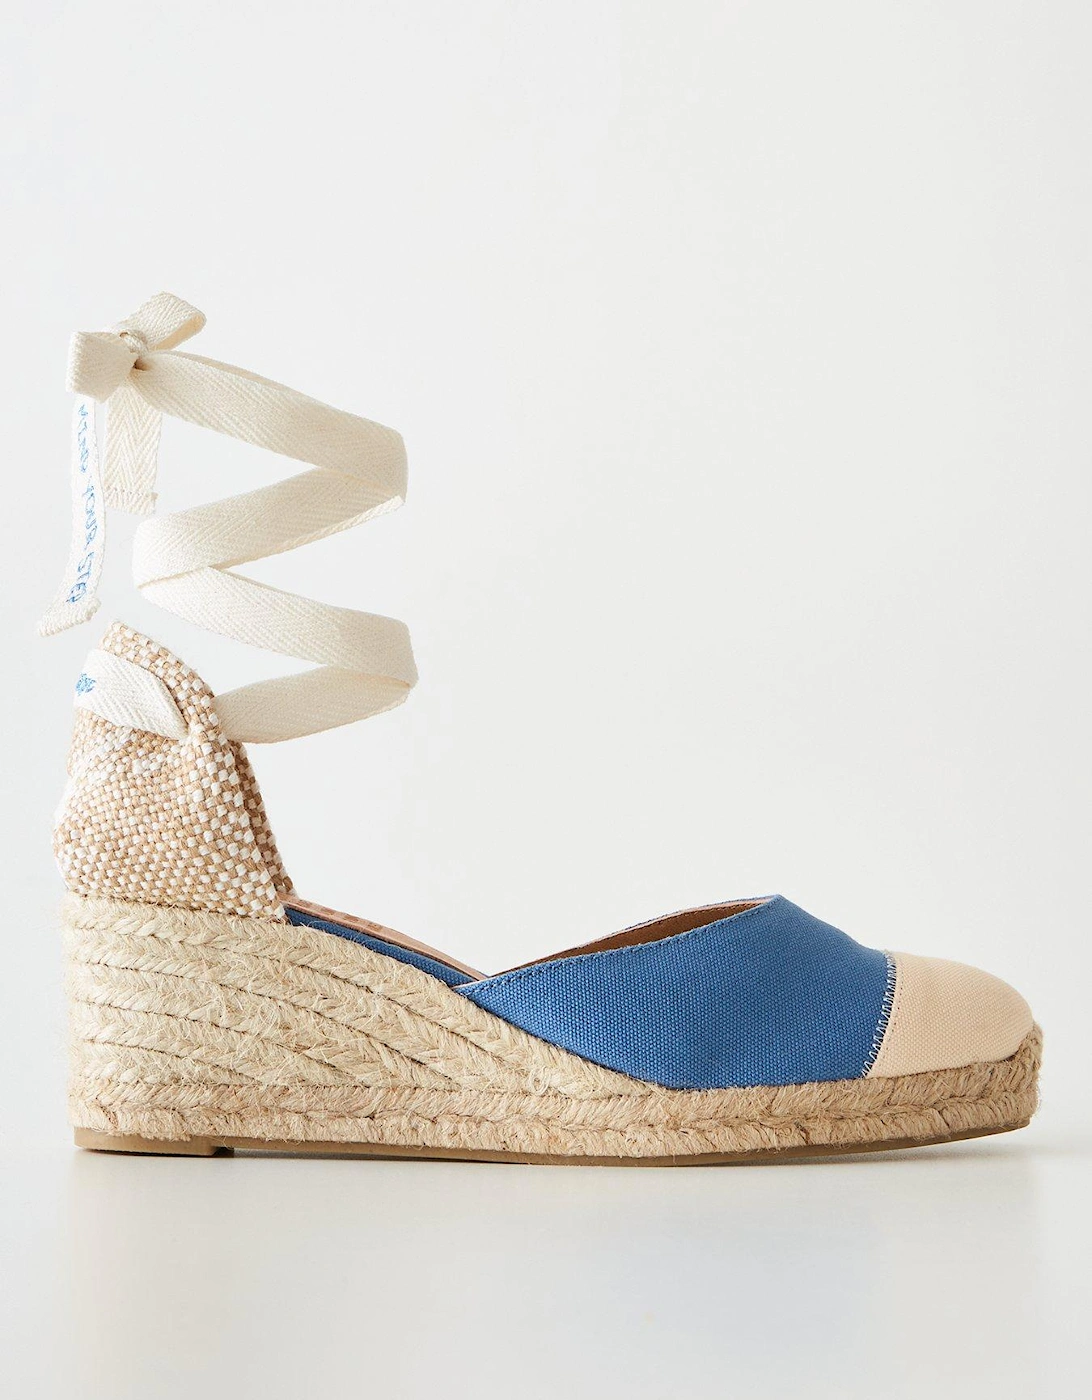 Carina 6 Wedged Espadrille Sandals - Blue, 7 of 6